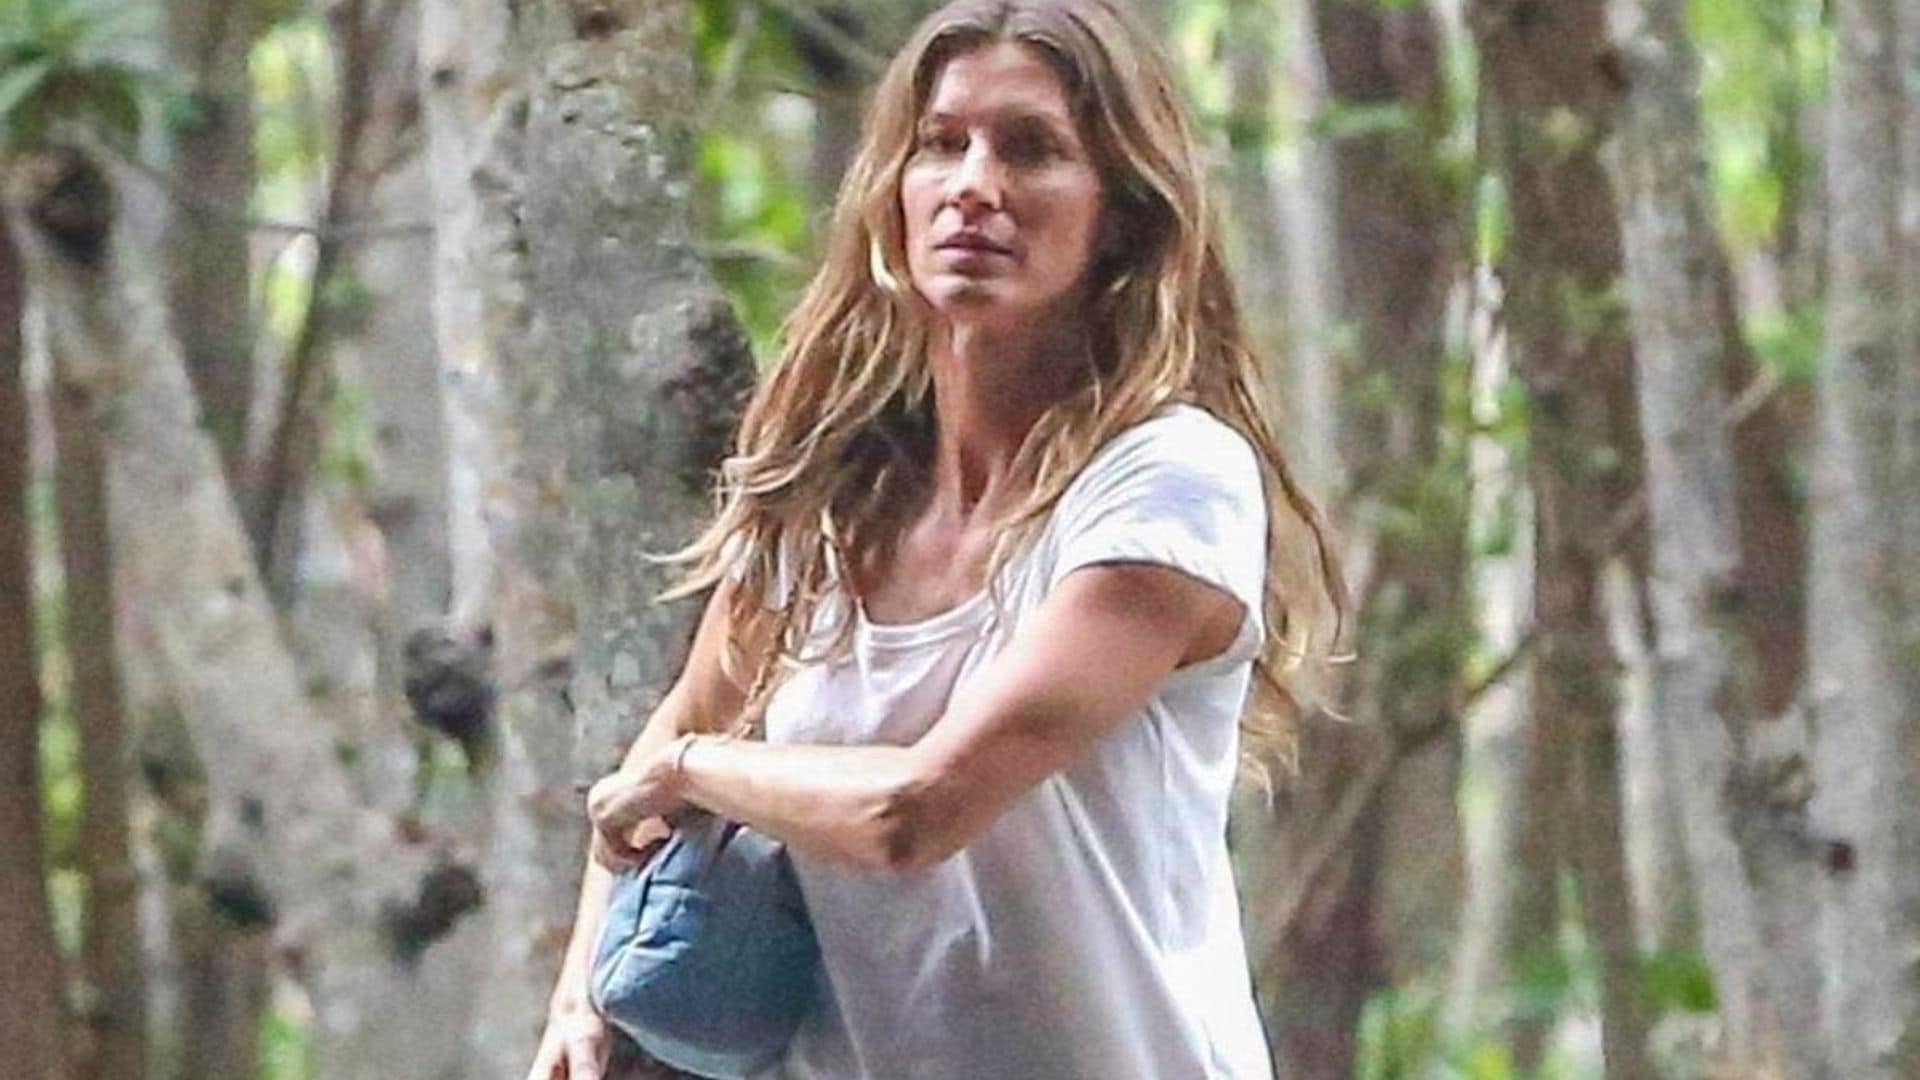 Gisele Bündchen seen out and about in Miami amid marital drama with Tom Brady